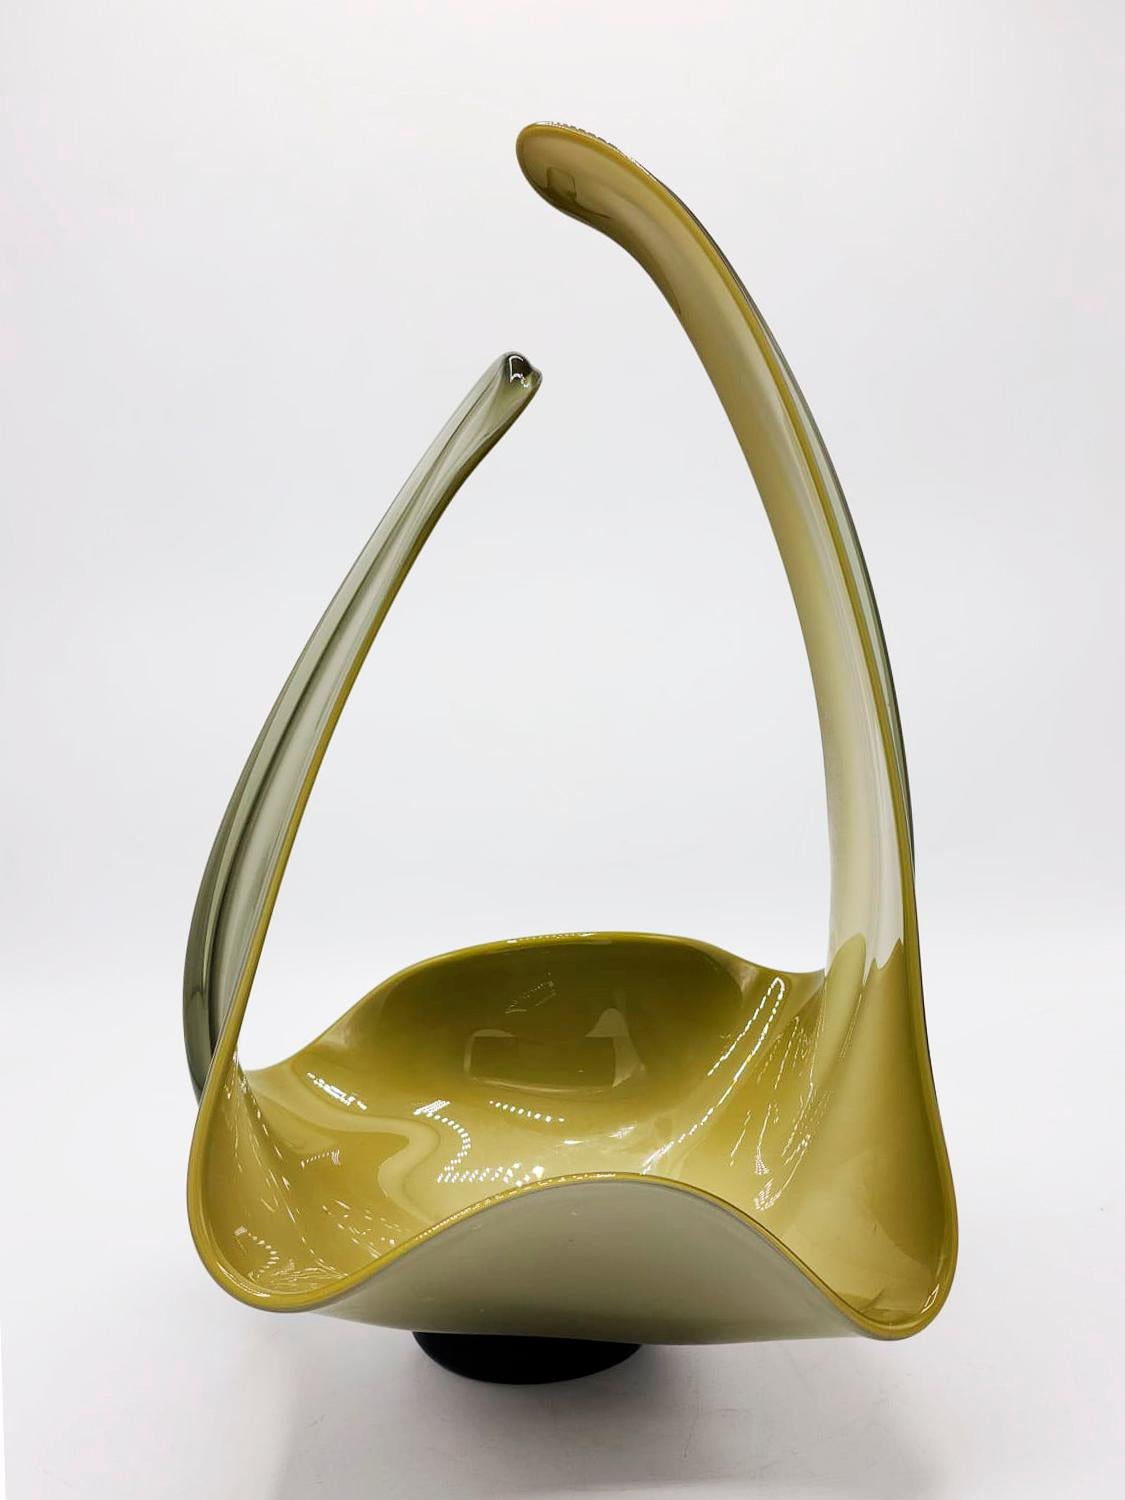 Italian modernist Murano glass vase with green tones for centerpiece
Extraordinary hand-blown Murano Sommerso glass centerpiece in green tones with irregular shape. Italy, 60s.
The interior part is made of white opaline glass. Beautiful organic